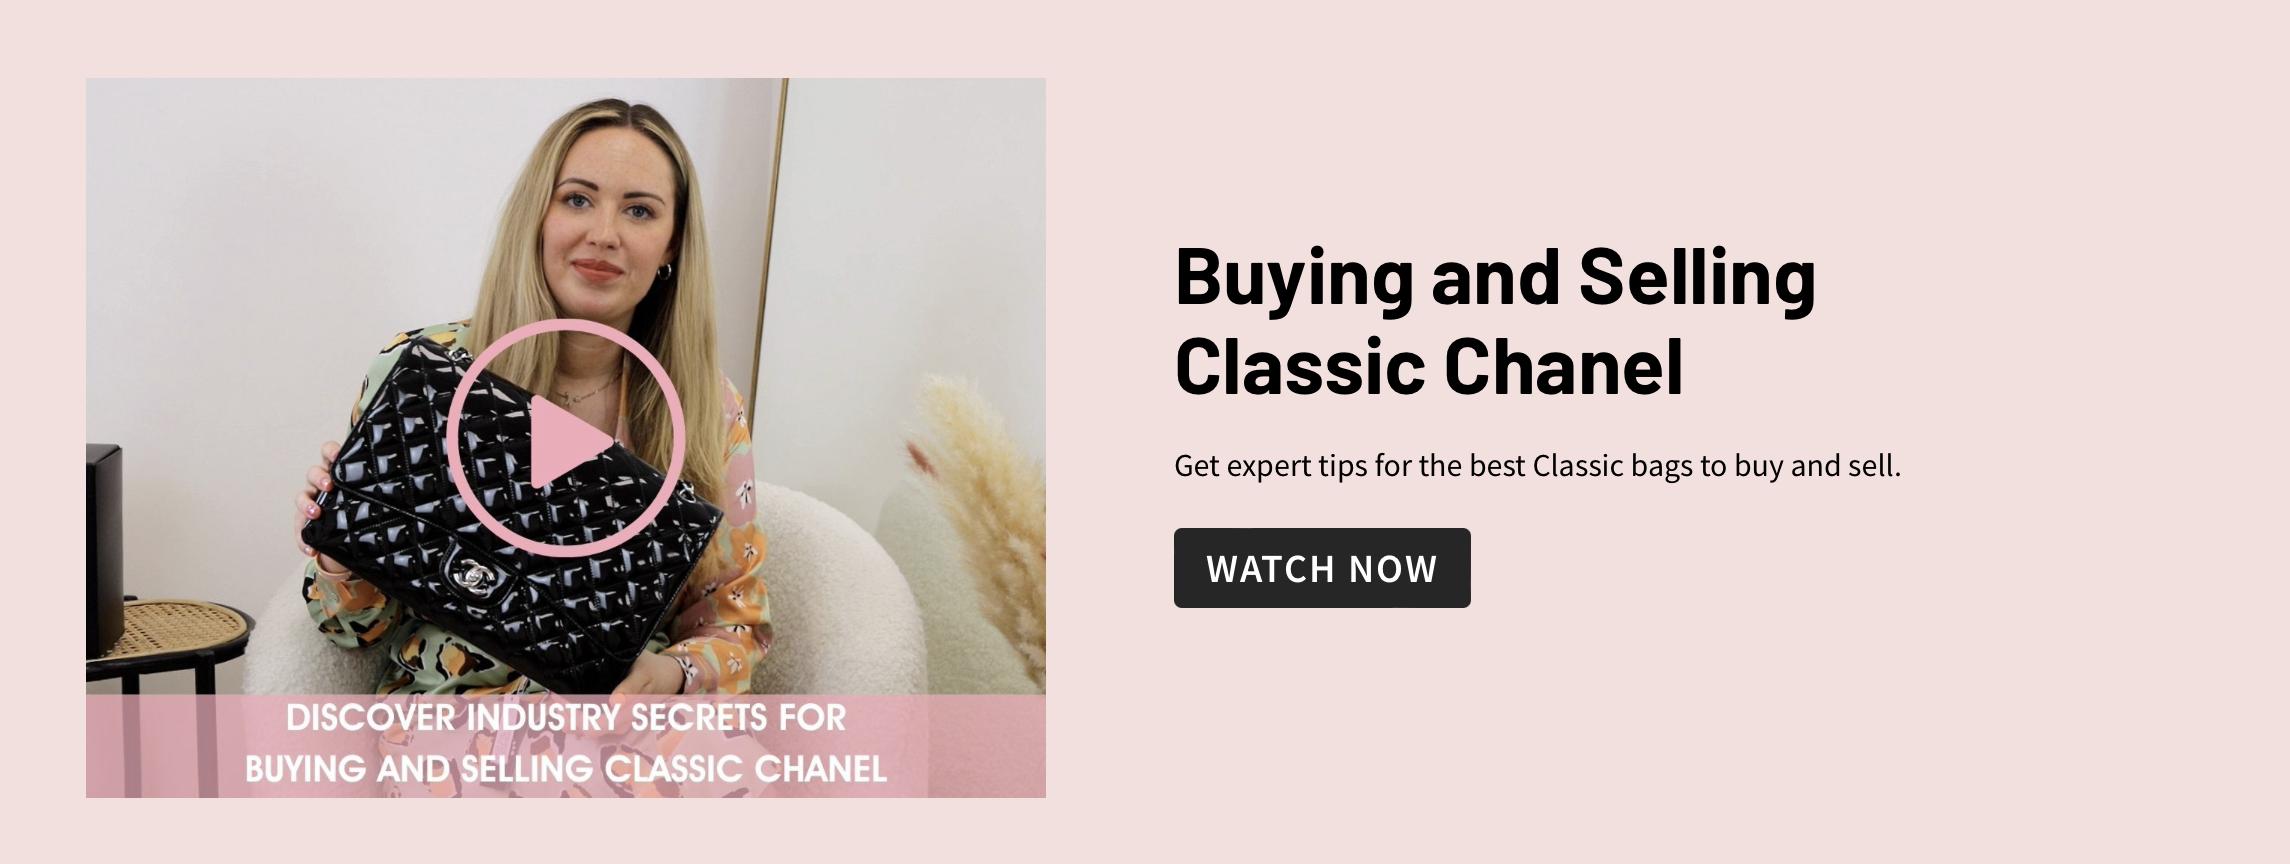 Discover how to buy and sell for the best deals with Classic Chanel's at The Handbag Clinic